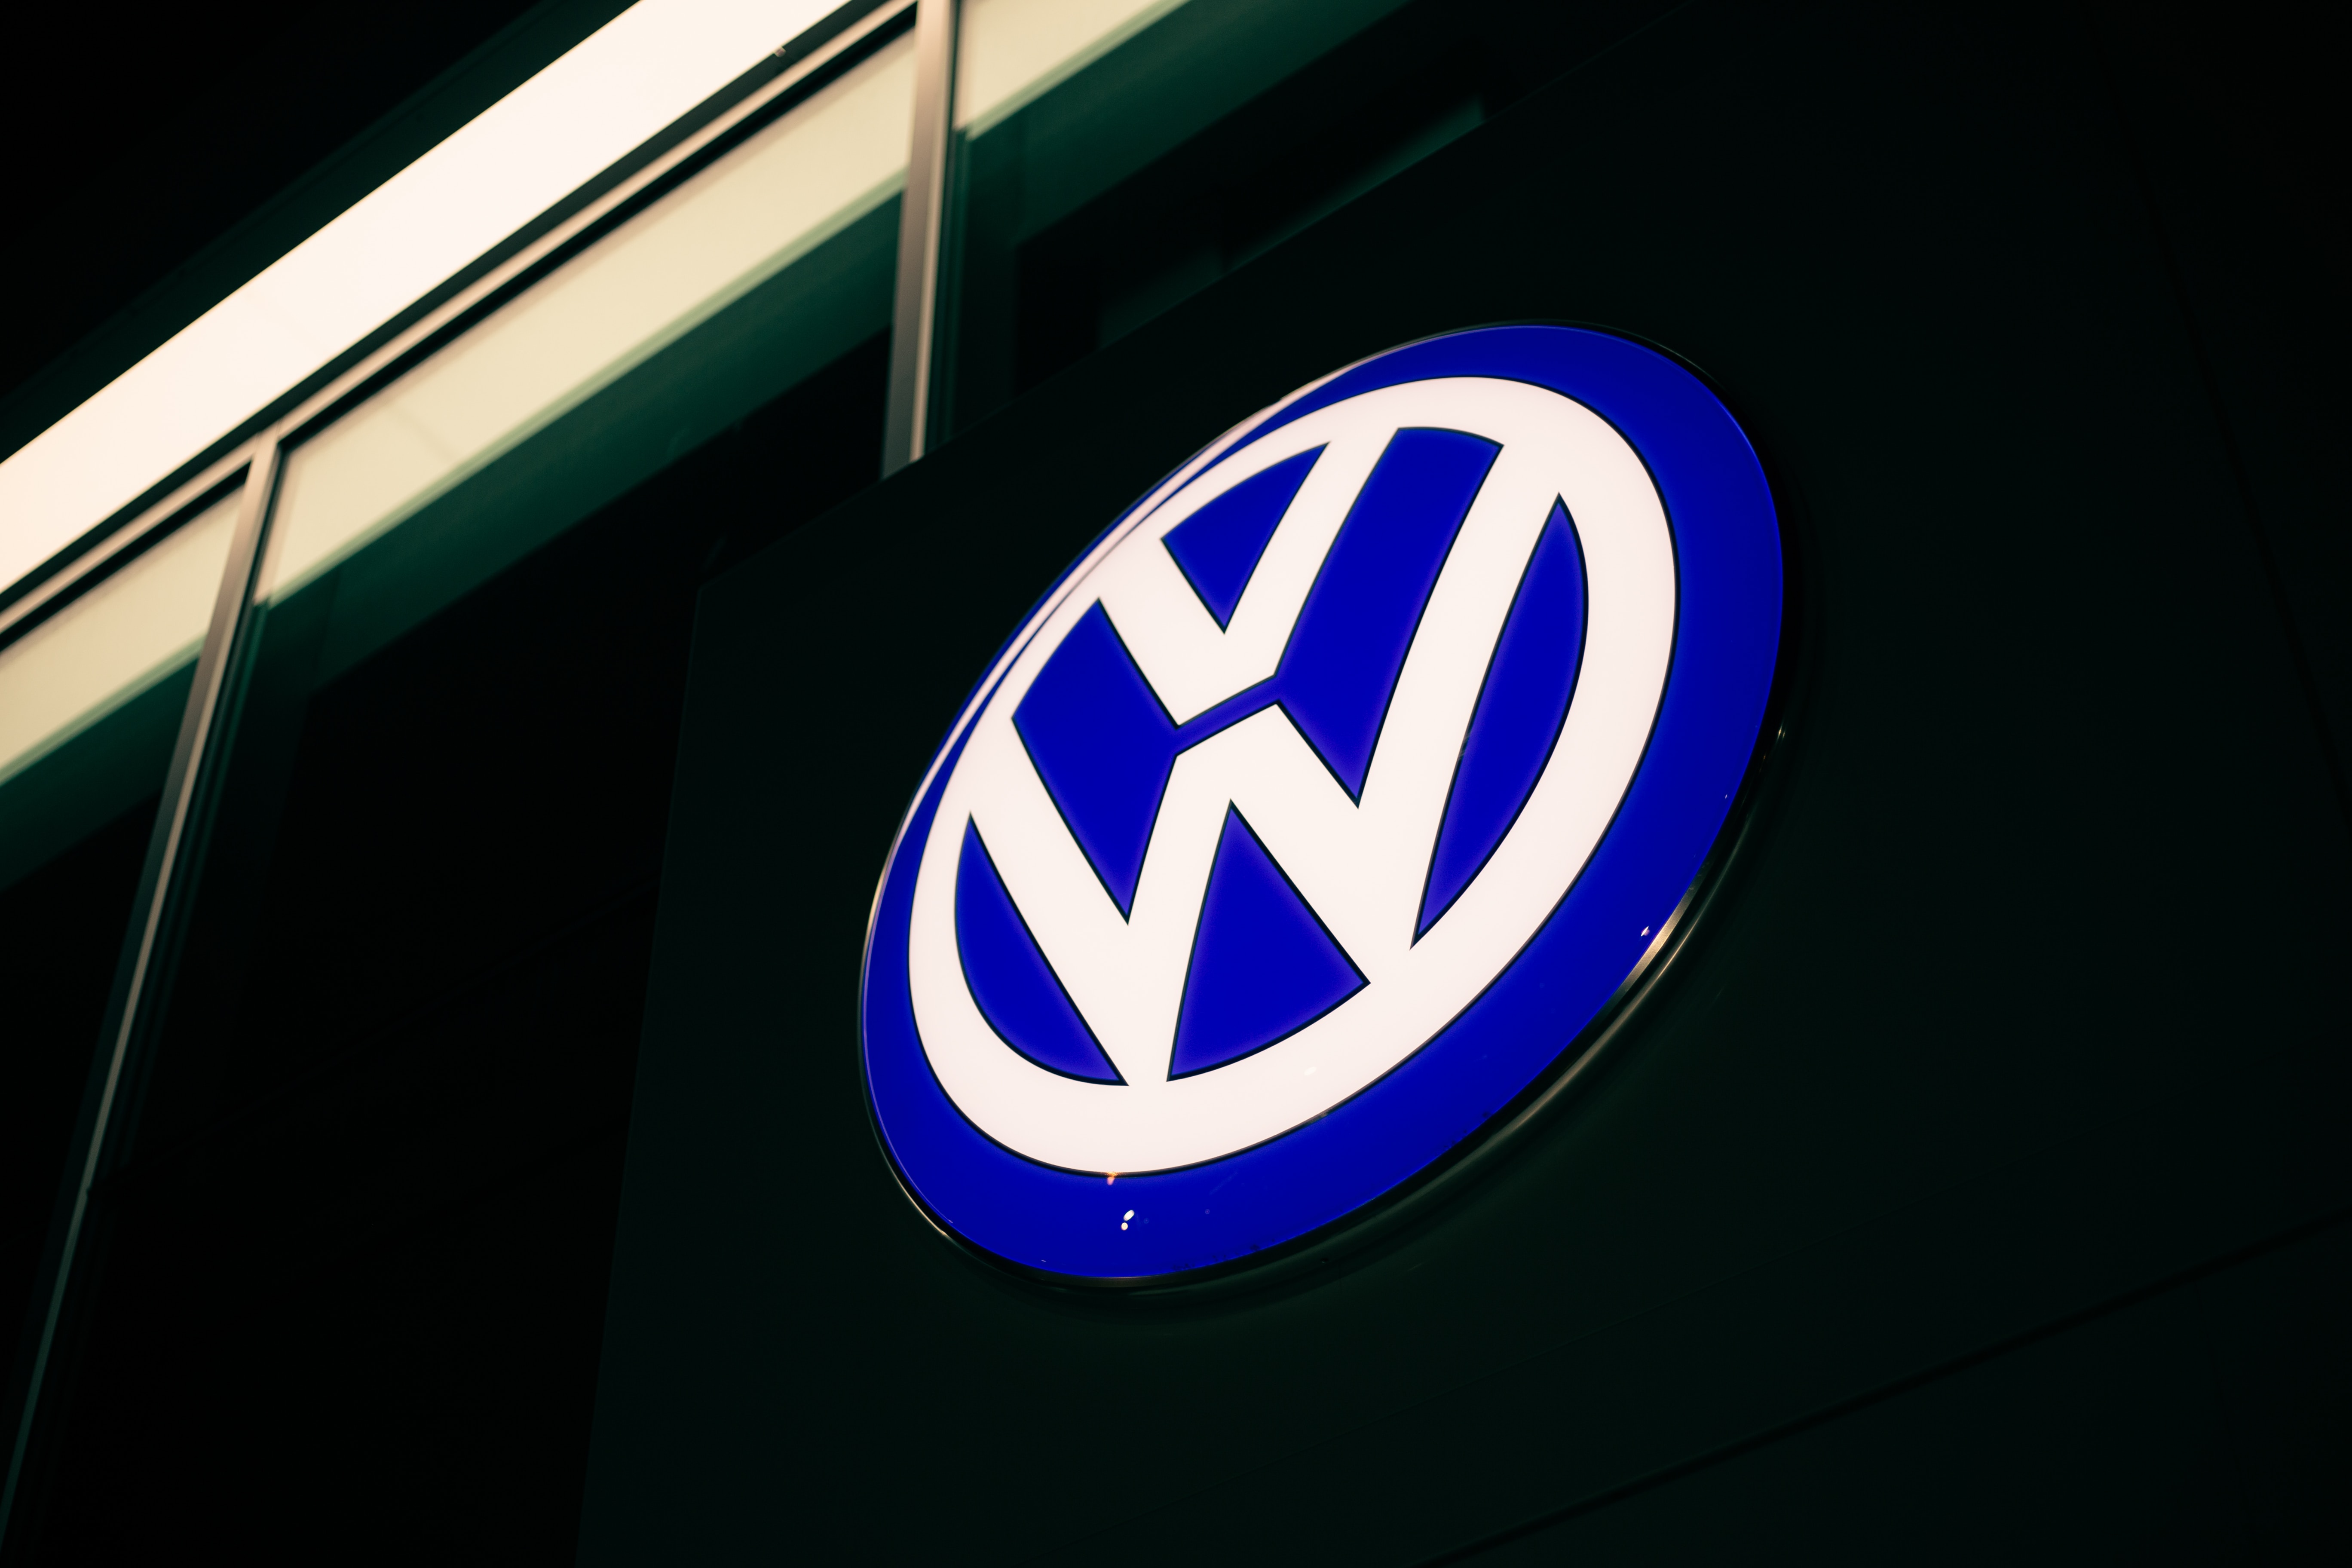 Volkswagen's challenges in Germany do not endanger production in Slovakia